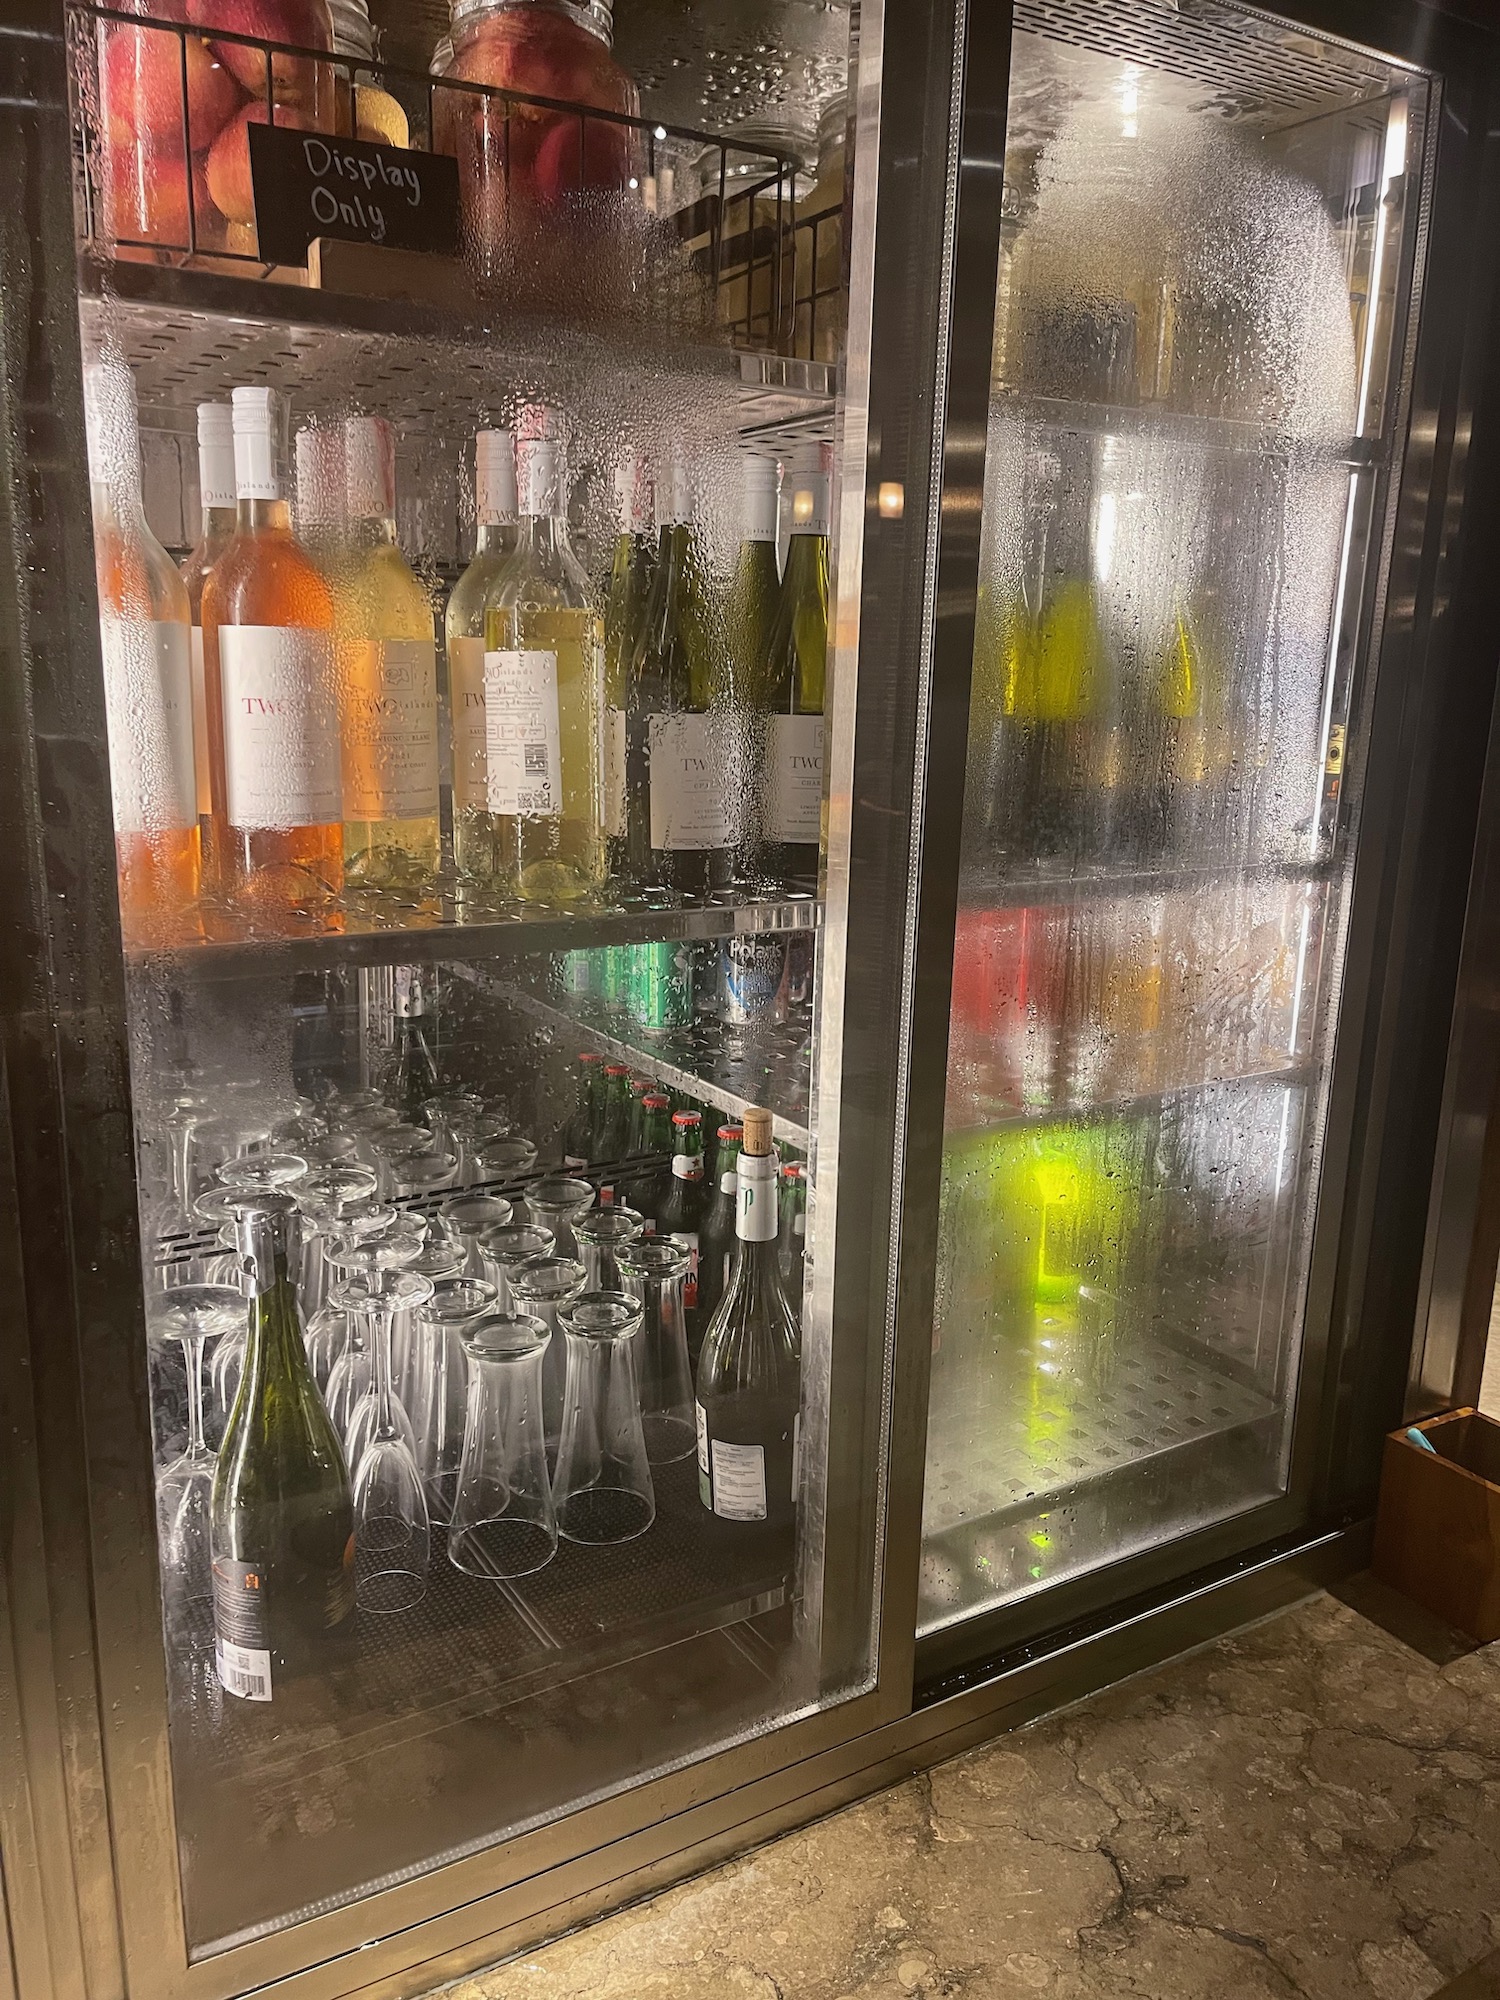 a refrigerator with bottles and glasses